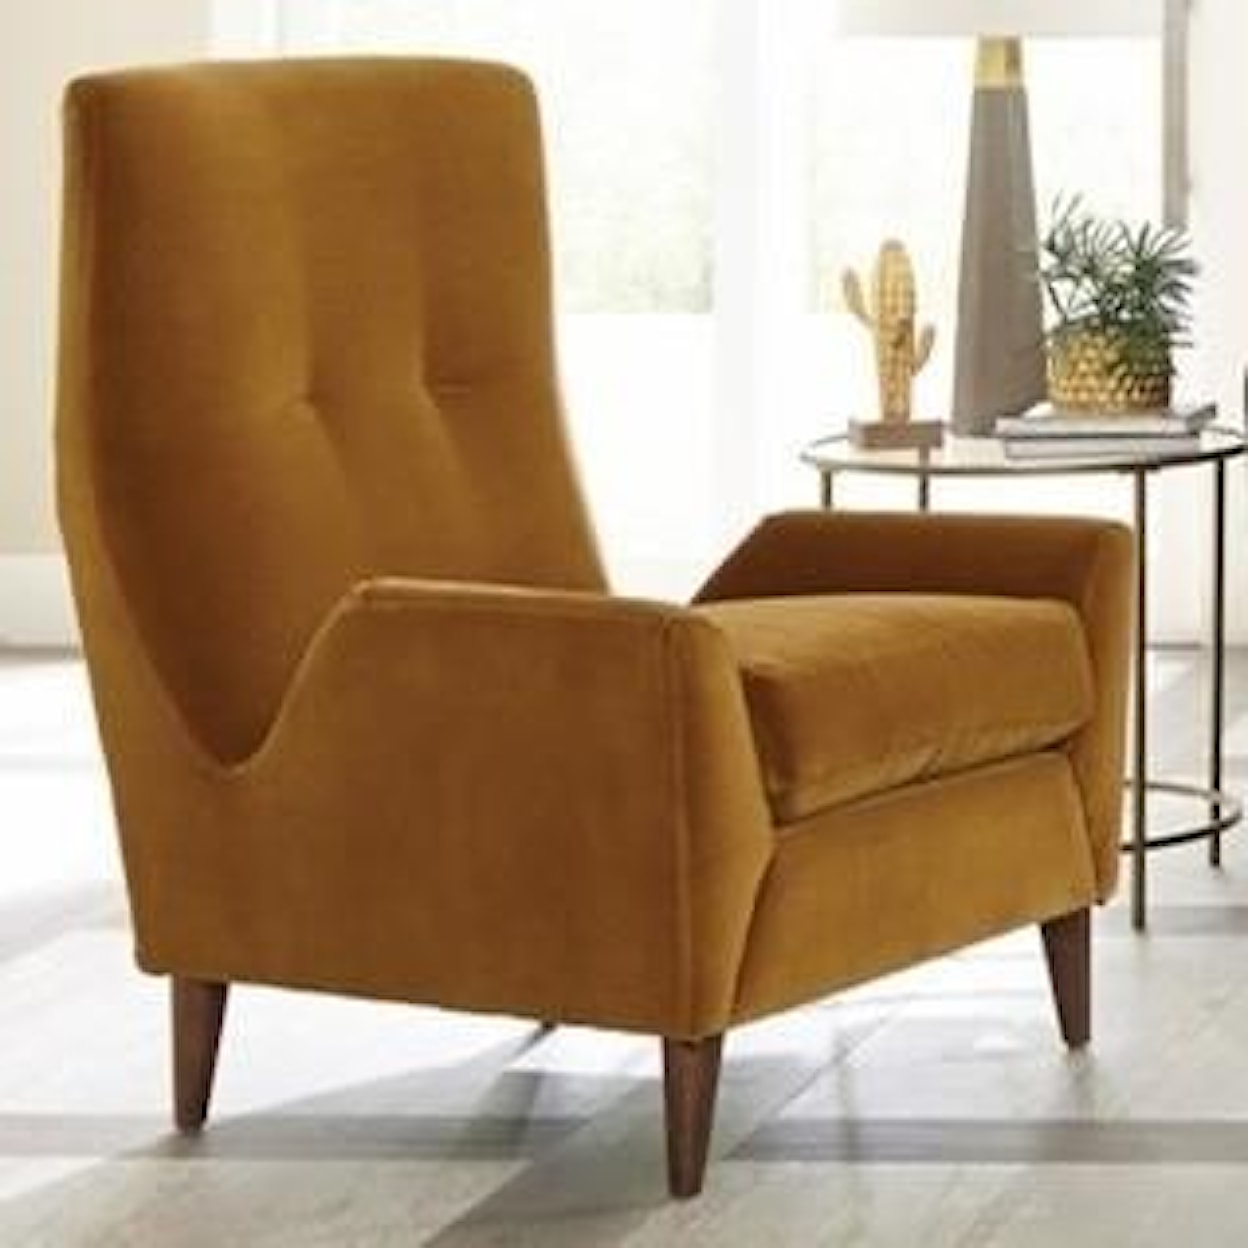 Jonathan Louis Jamison Wing Accent Chair